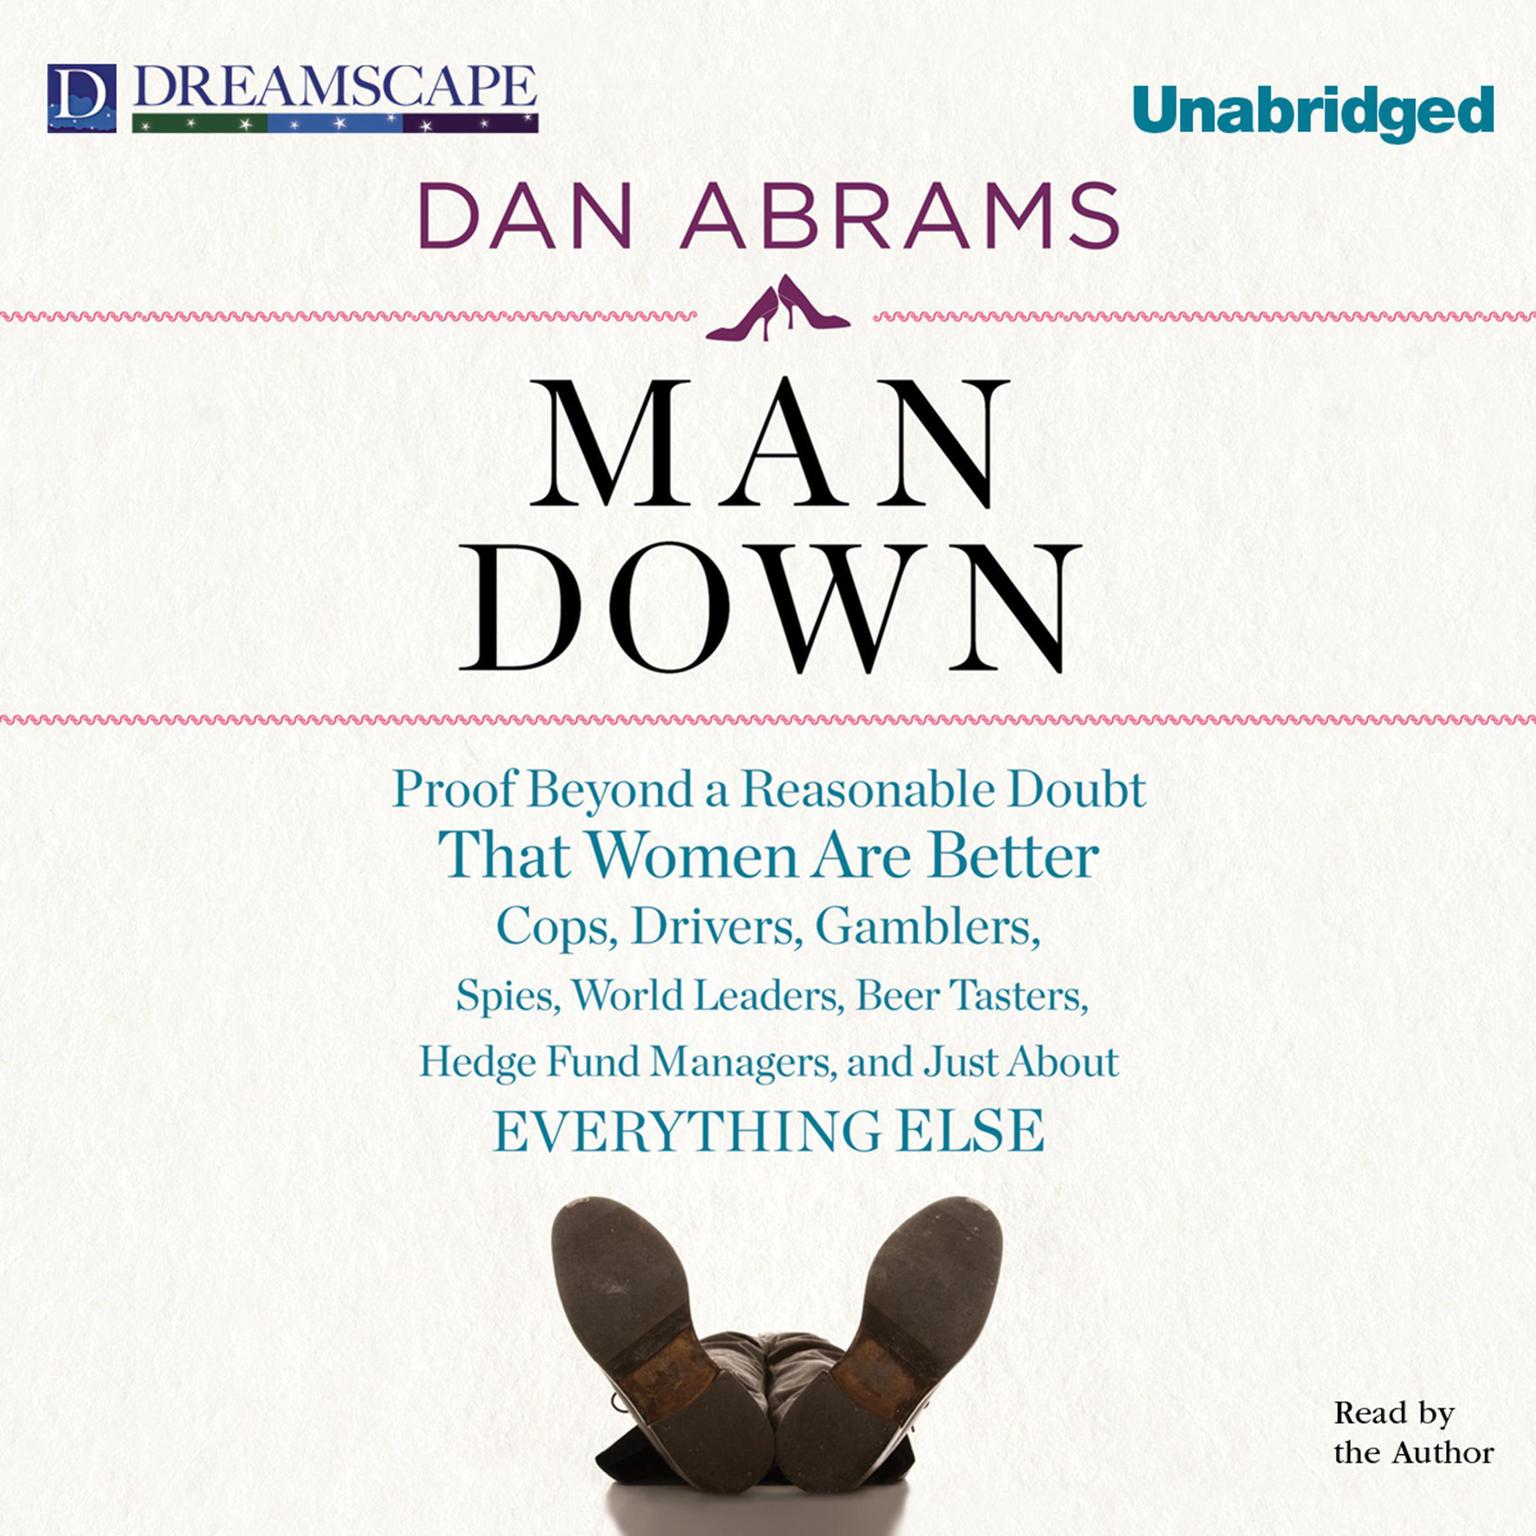 Man Down: A Widower Hockey Romance Audiobook, by Kate Meader